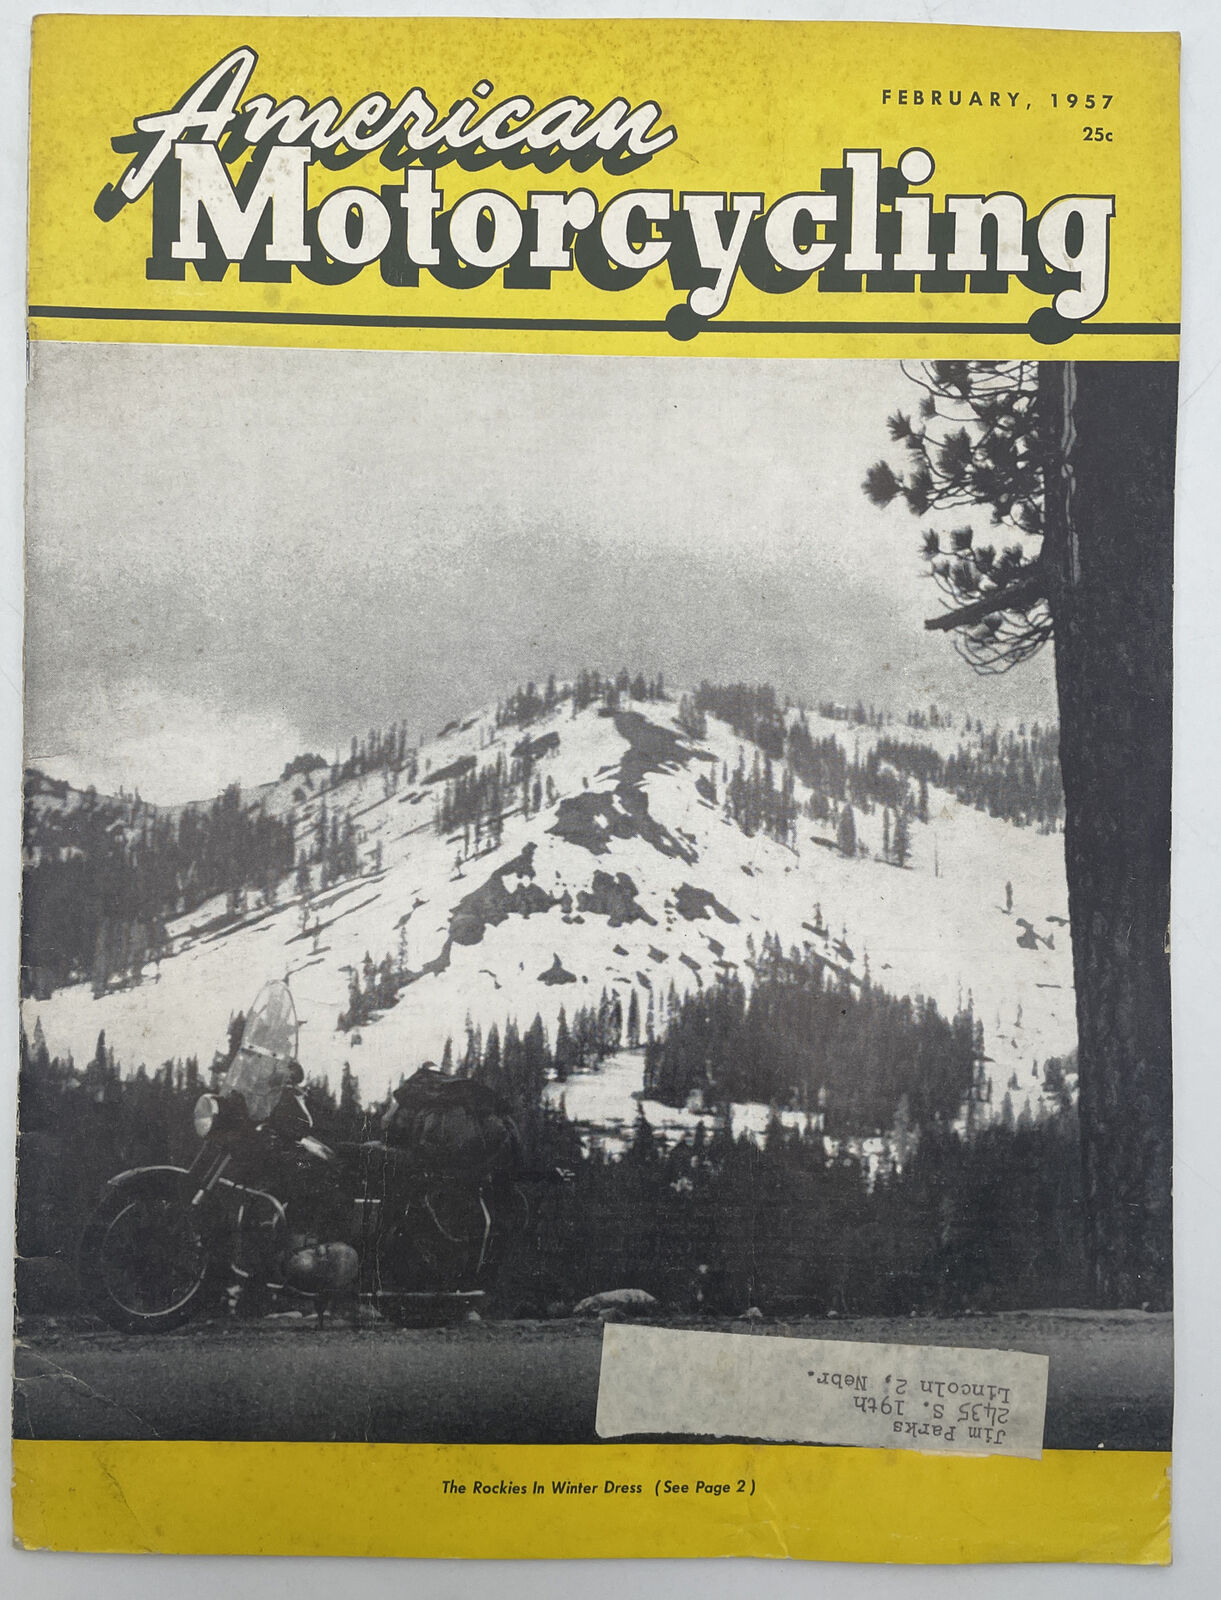 AMERICAN MOTORCYCLING MAGAZINE FEBRUARY 1957 THE ROCKIES IN WINTER GREAT ADS